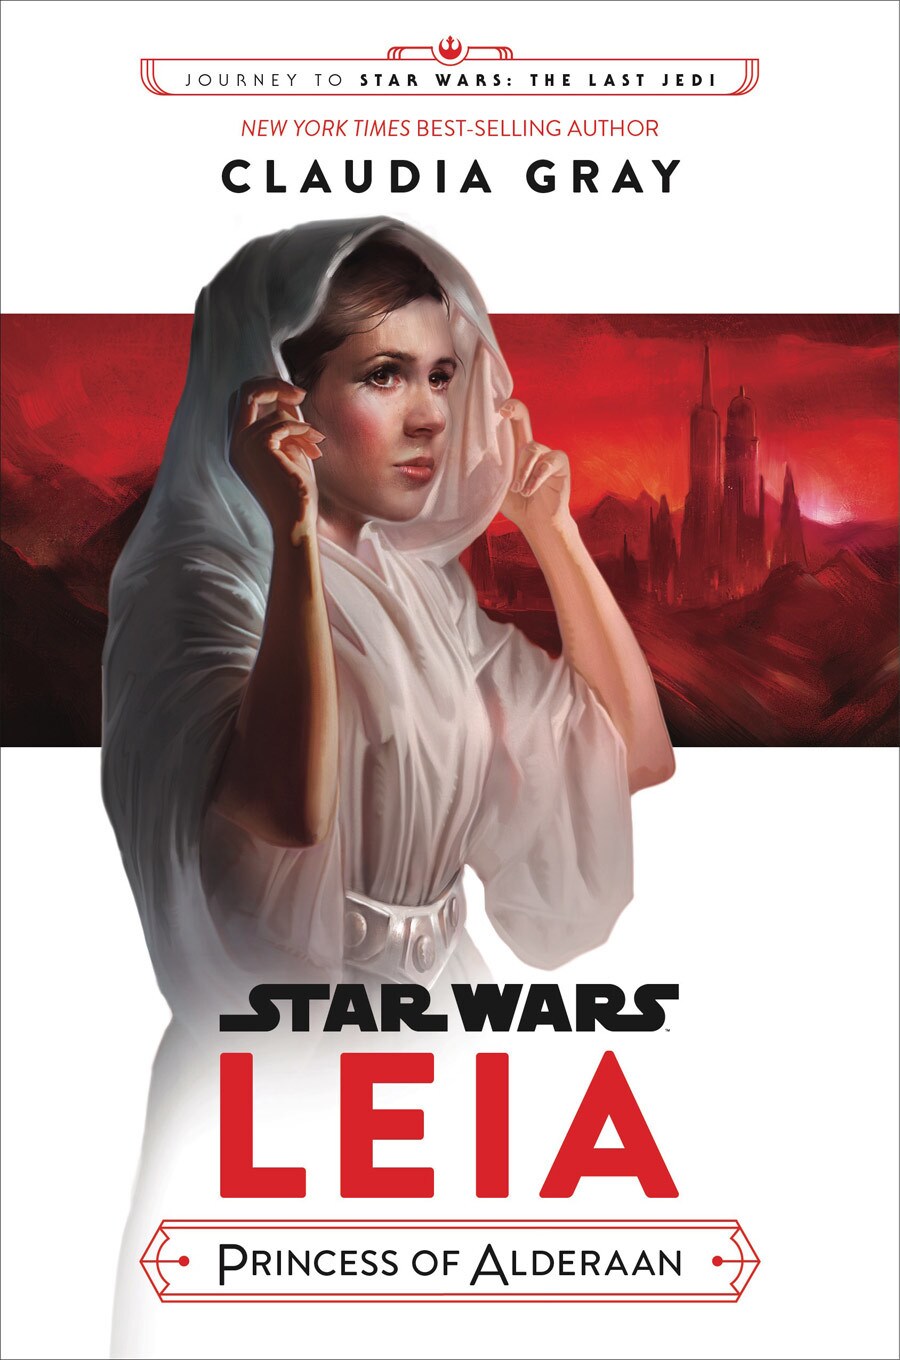 Princess Leia reaches for her hood on the cover of Leia: Princess of Alderaan.